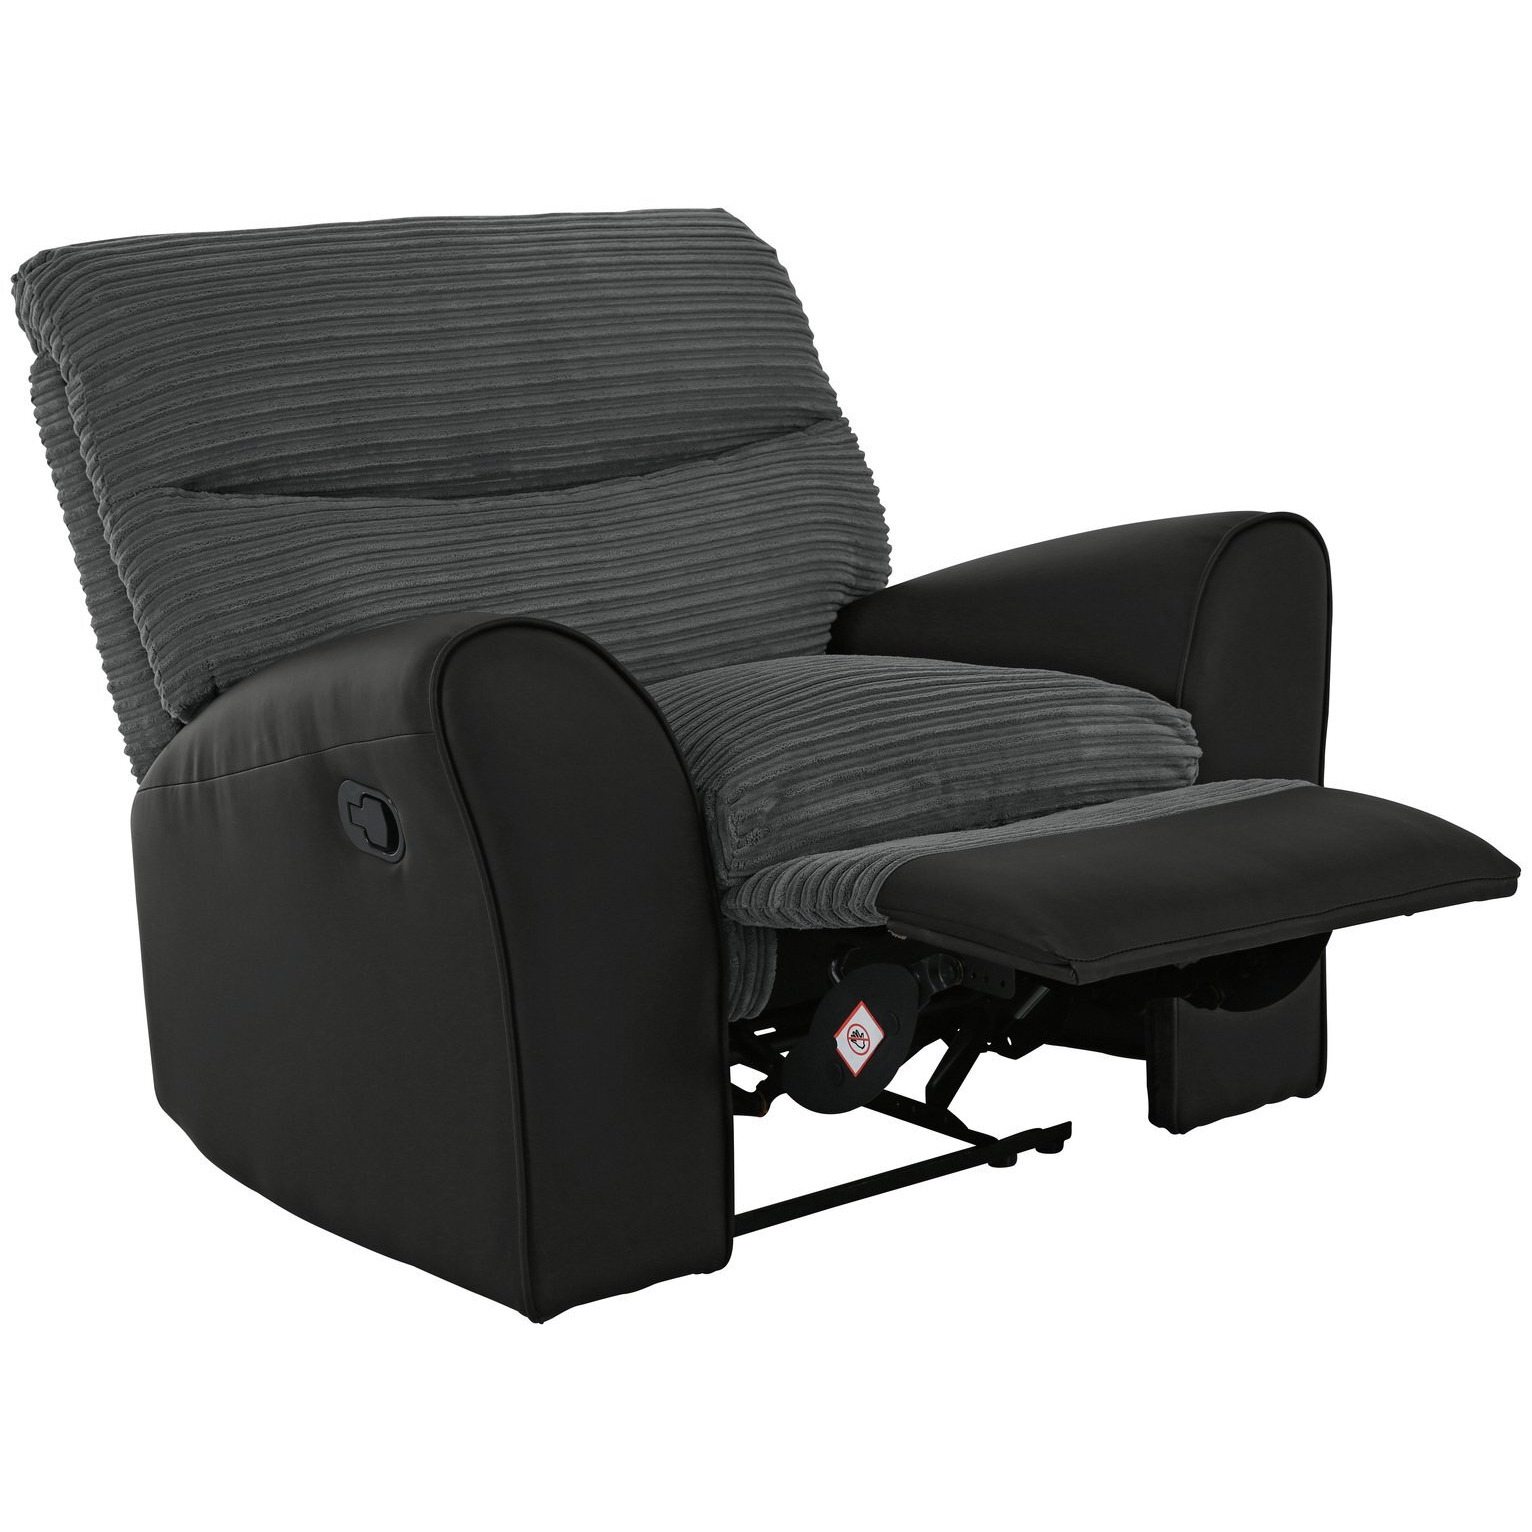 Argos Home Harry Fabric Recliner Chair - Charcoal - image 1